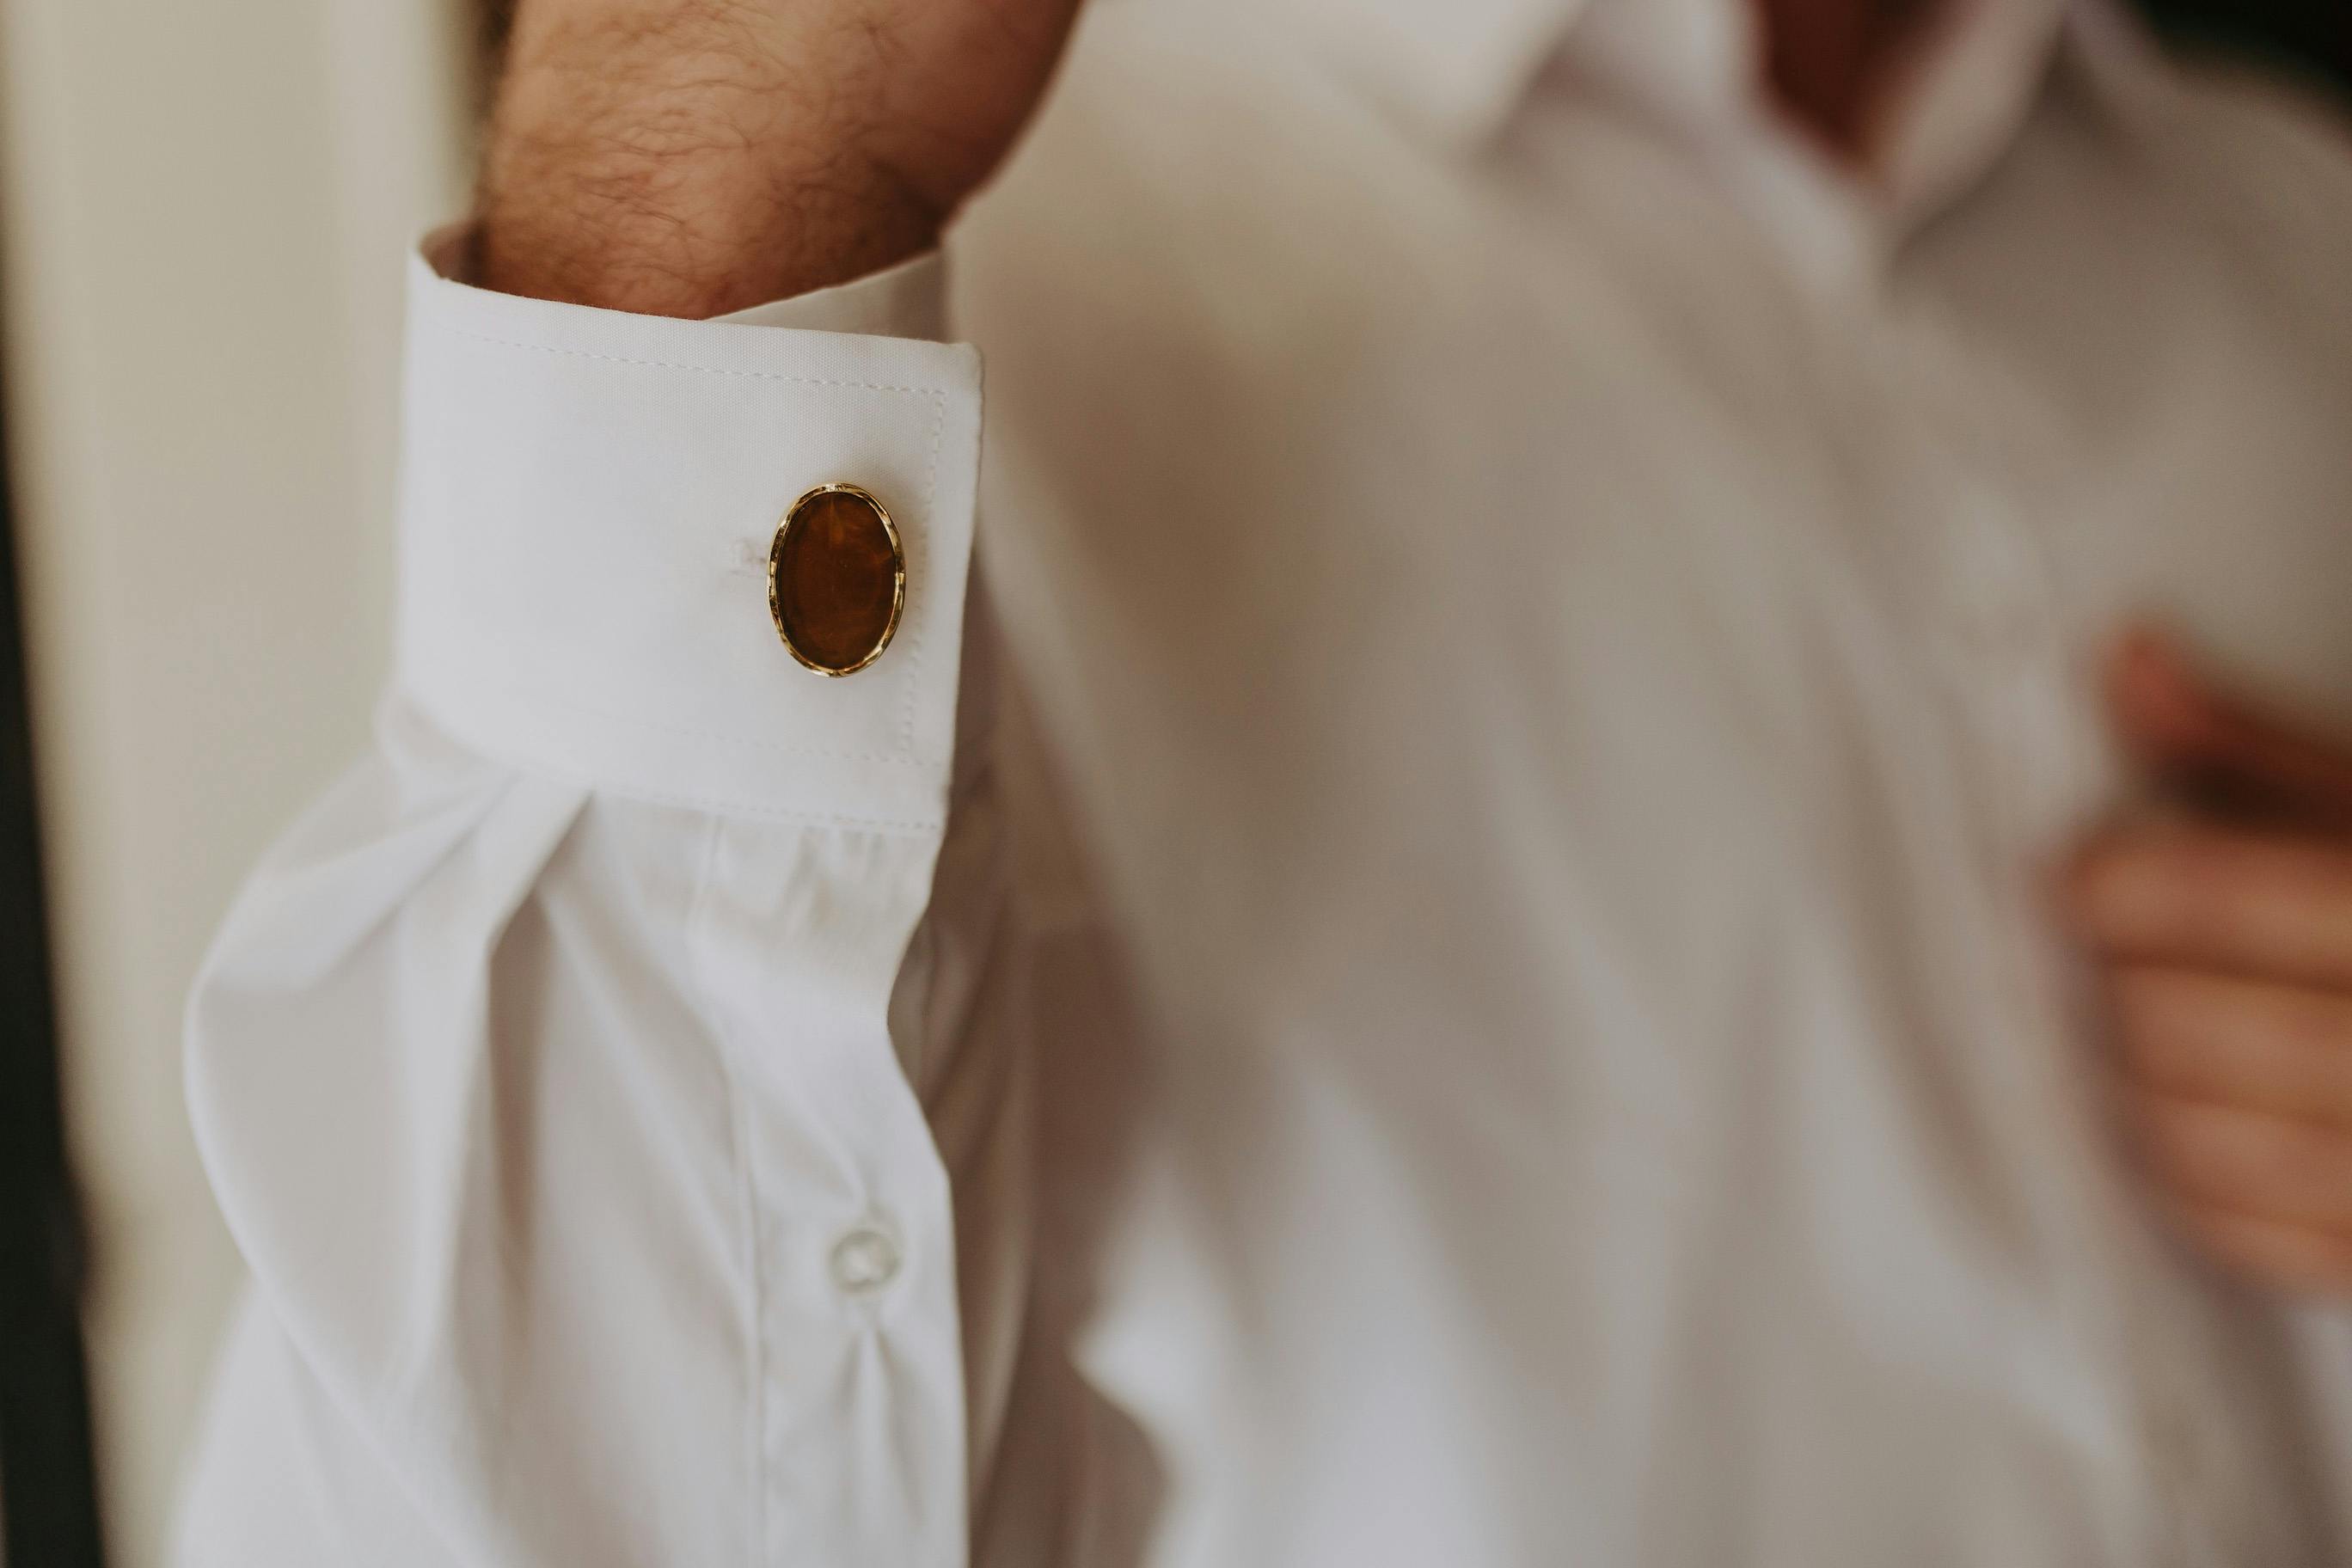 A person wearing a white dress shirt with a gold cufflink on the cuff. The image is closely cropped to focus on the cufflink and part of the arm. The background is blurred, making the cufflink the central element of the photo.